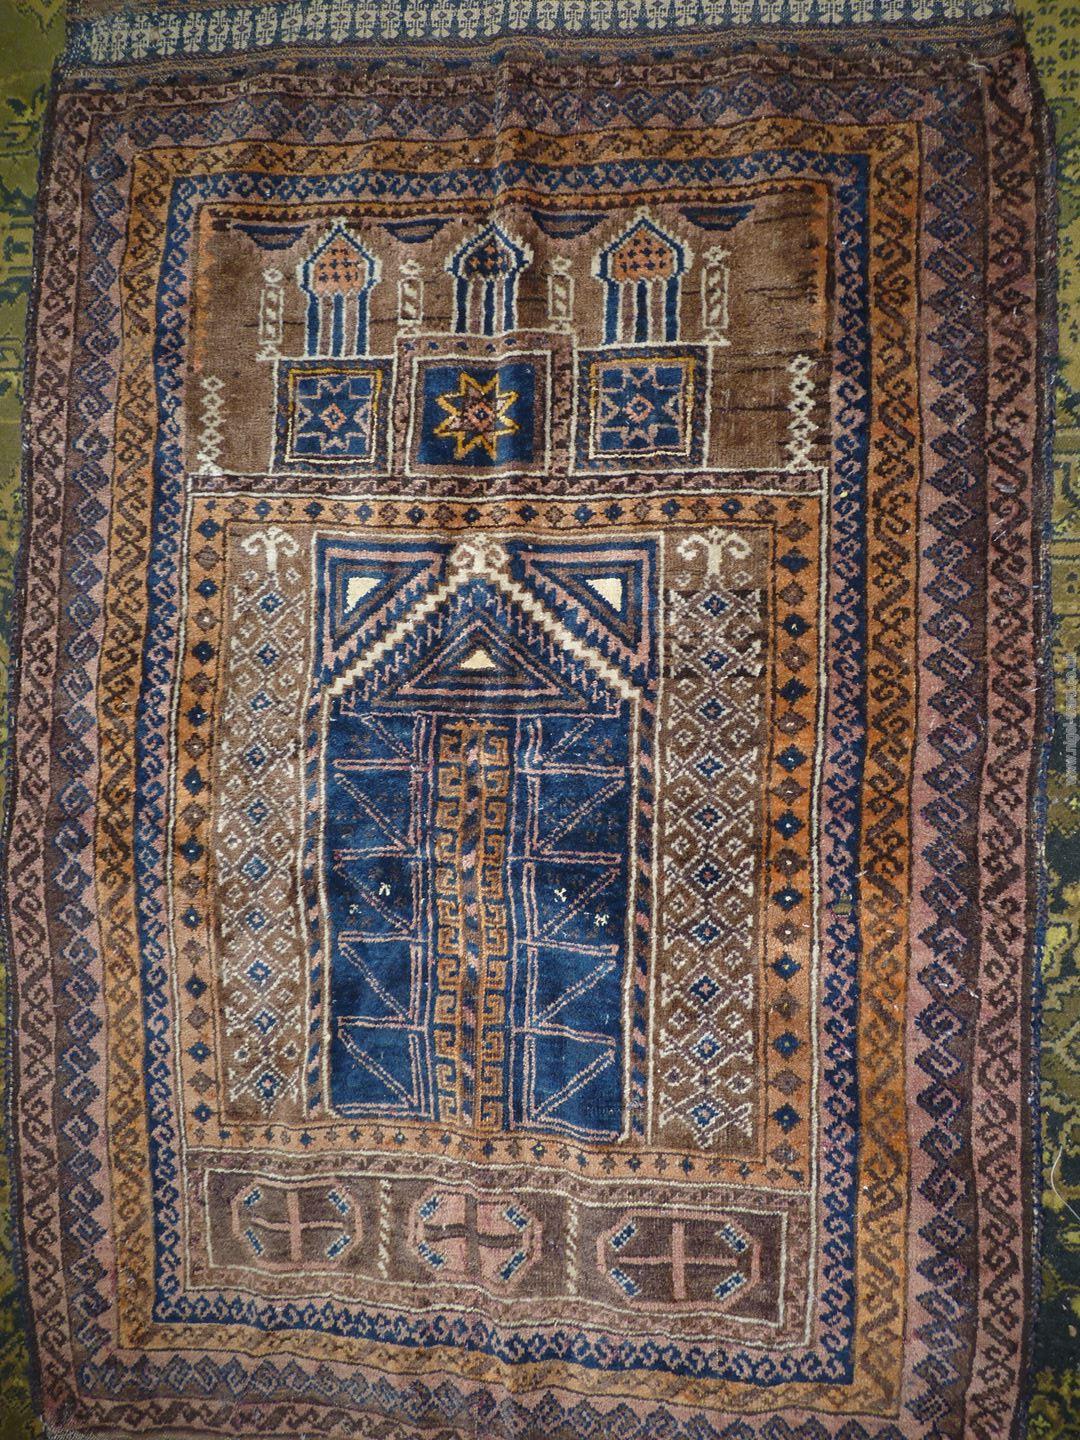 A Prayer rug in earth tones, brown and navy, 60'' x 35'' including fringe, some holes. - Image 2 of 4